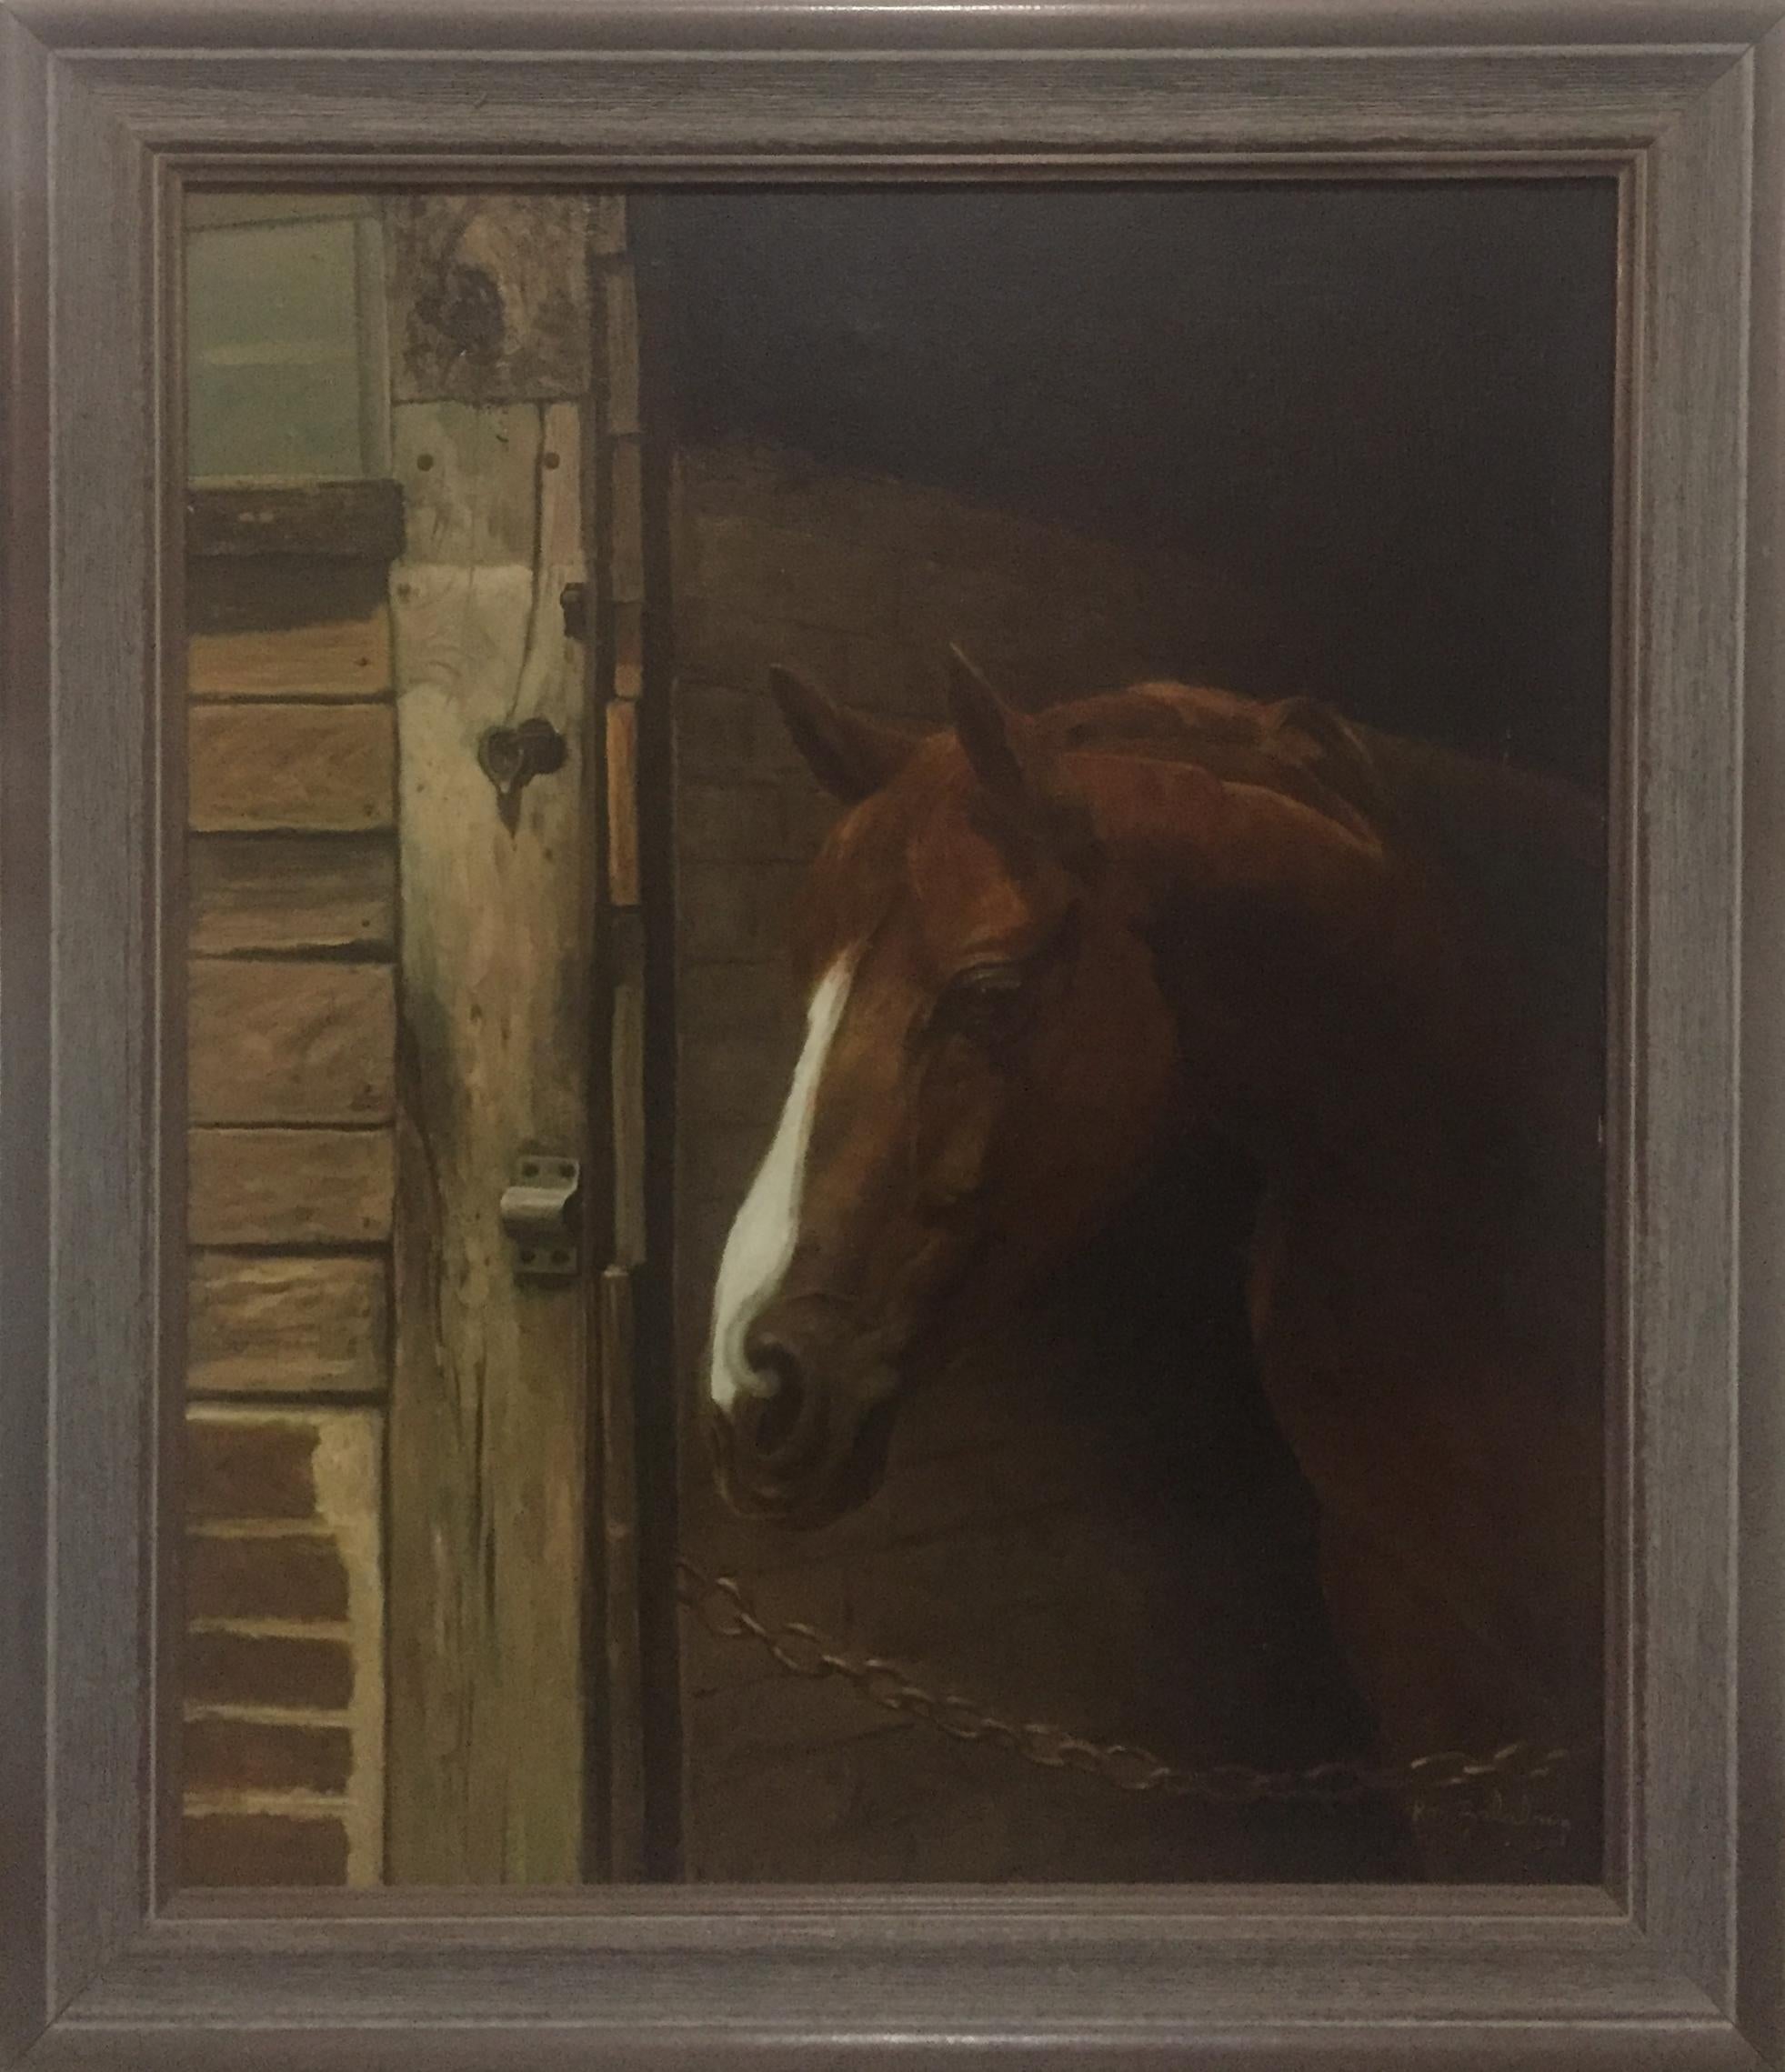 Bay Horse at Rest - Painting by Ron Balaban